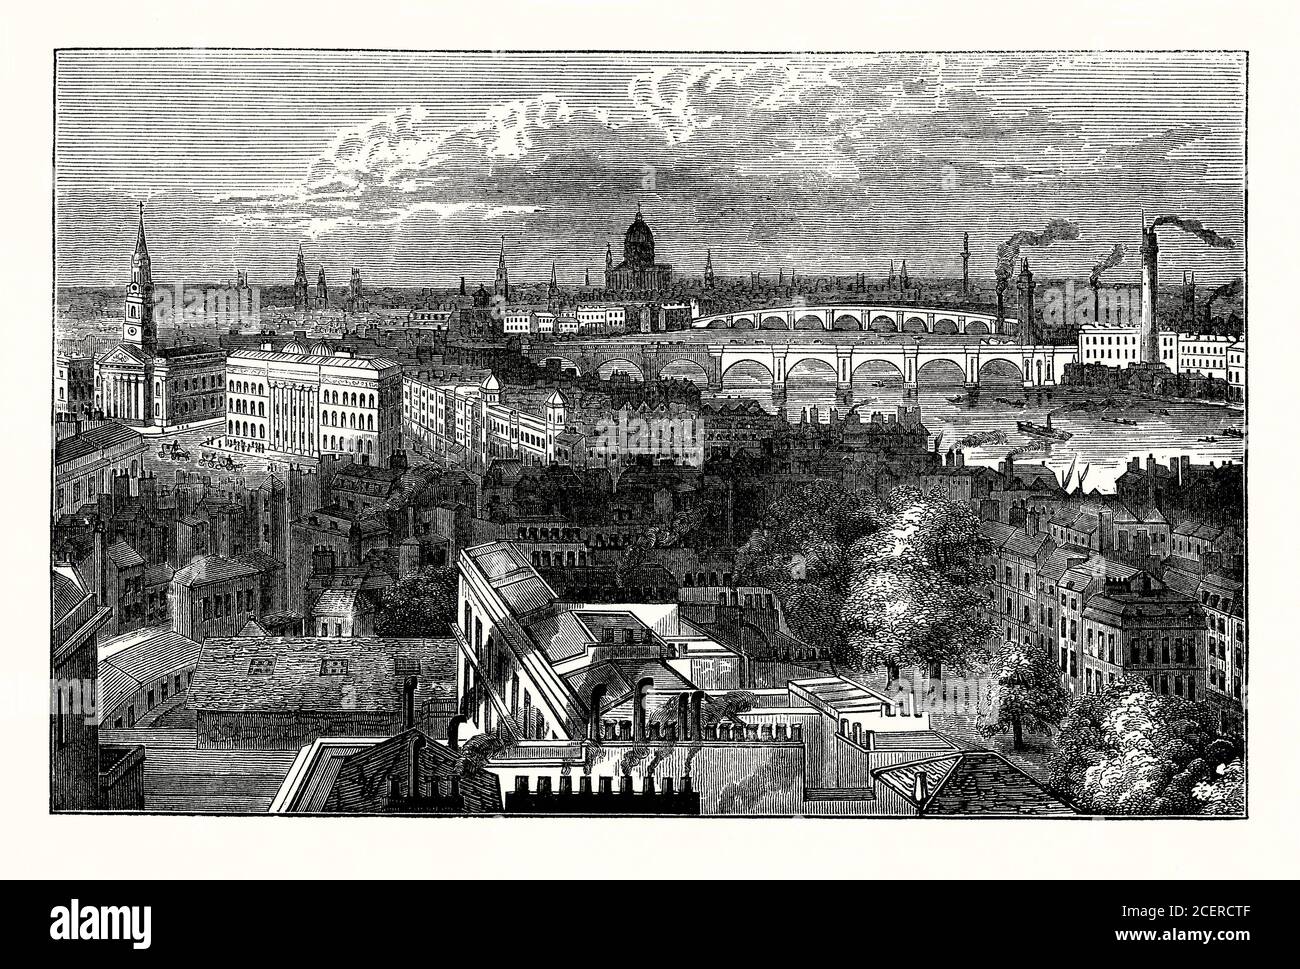 A mid 1800s old engraving of the panoramic view from York Column looking east over Victorian London and the River Thames with Waterloo and Blackfriars Bridges and in the distance St Pauls Cathedral. The bridge nearest is Waterloo Bridge. It was designed by John Rennie and opened in 1817 as a toll bridge. Behind is Blackfriars Bridge. It was a toll bridge designed in an Italianate style by Robert Mylne. It opening in 1769. It was originally named ‘William Pitt Bridge’ (after the Prime Minister William Pitt the Elder). Stock Photo